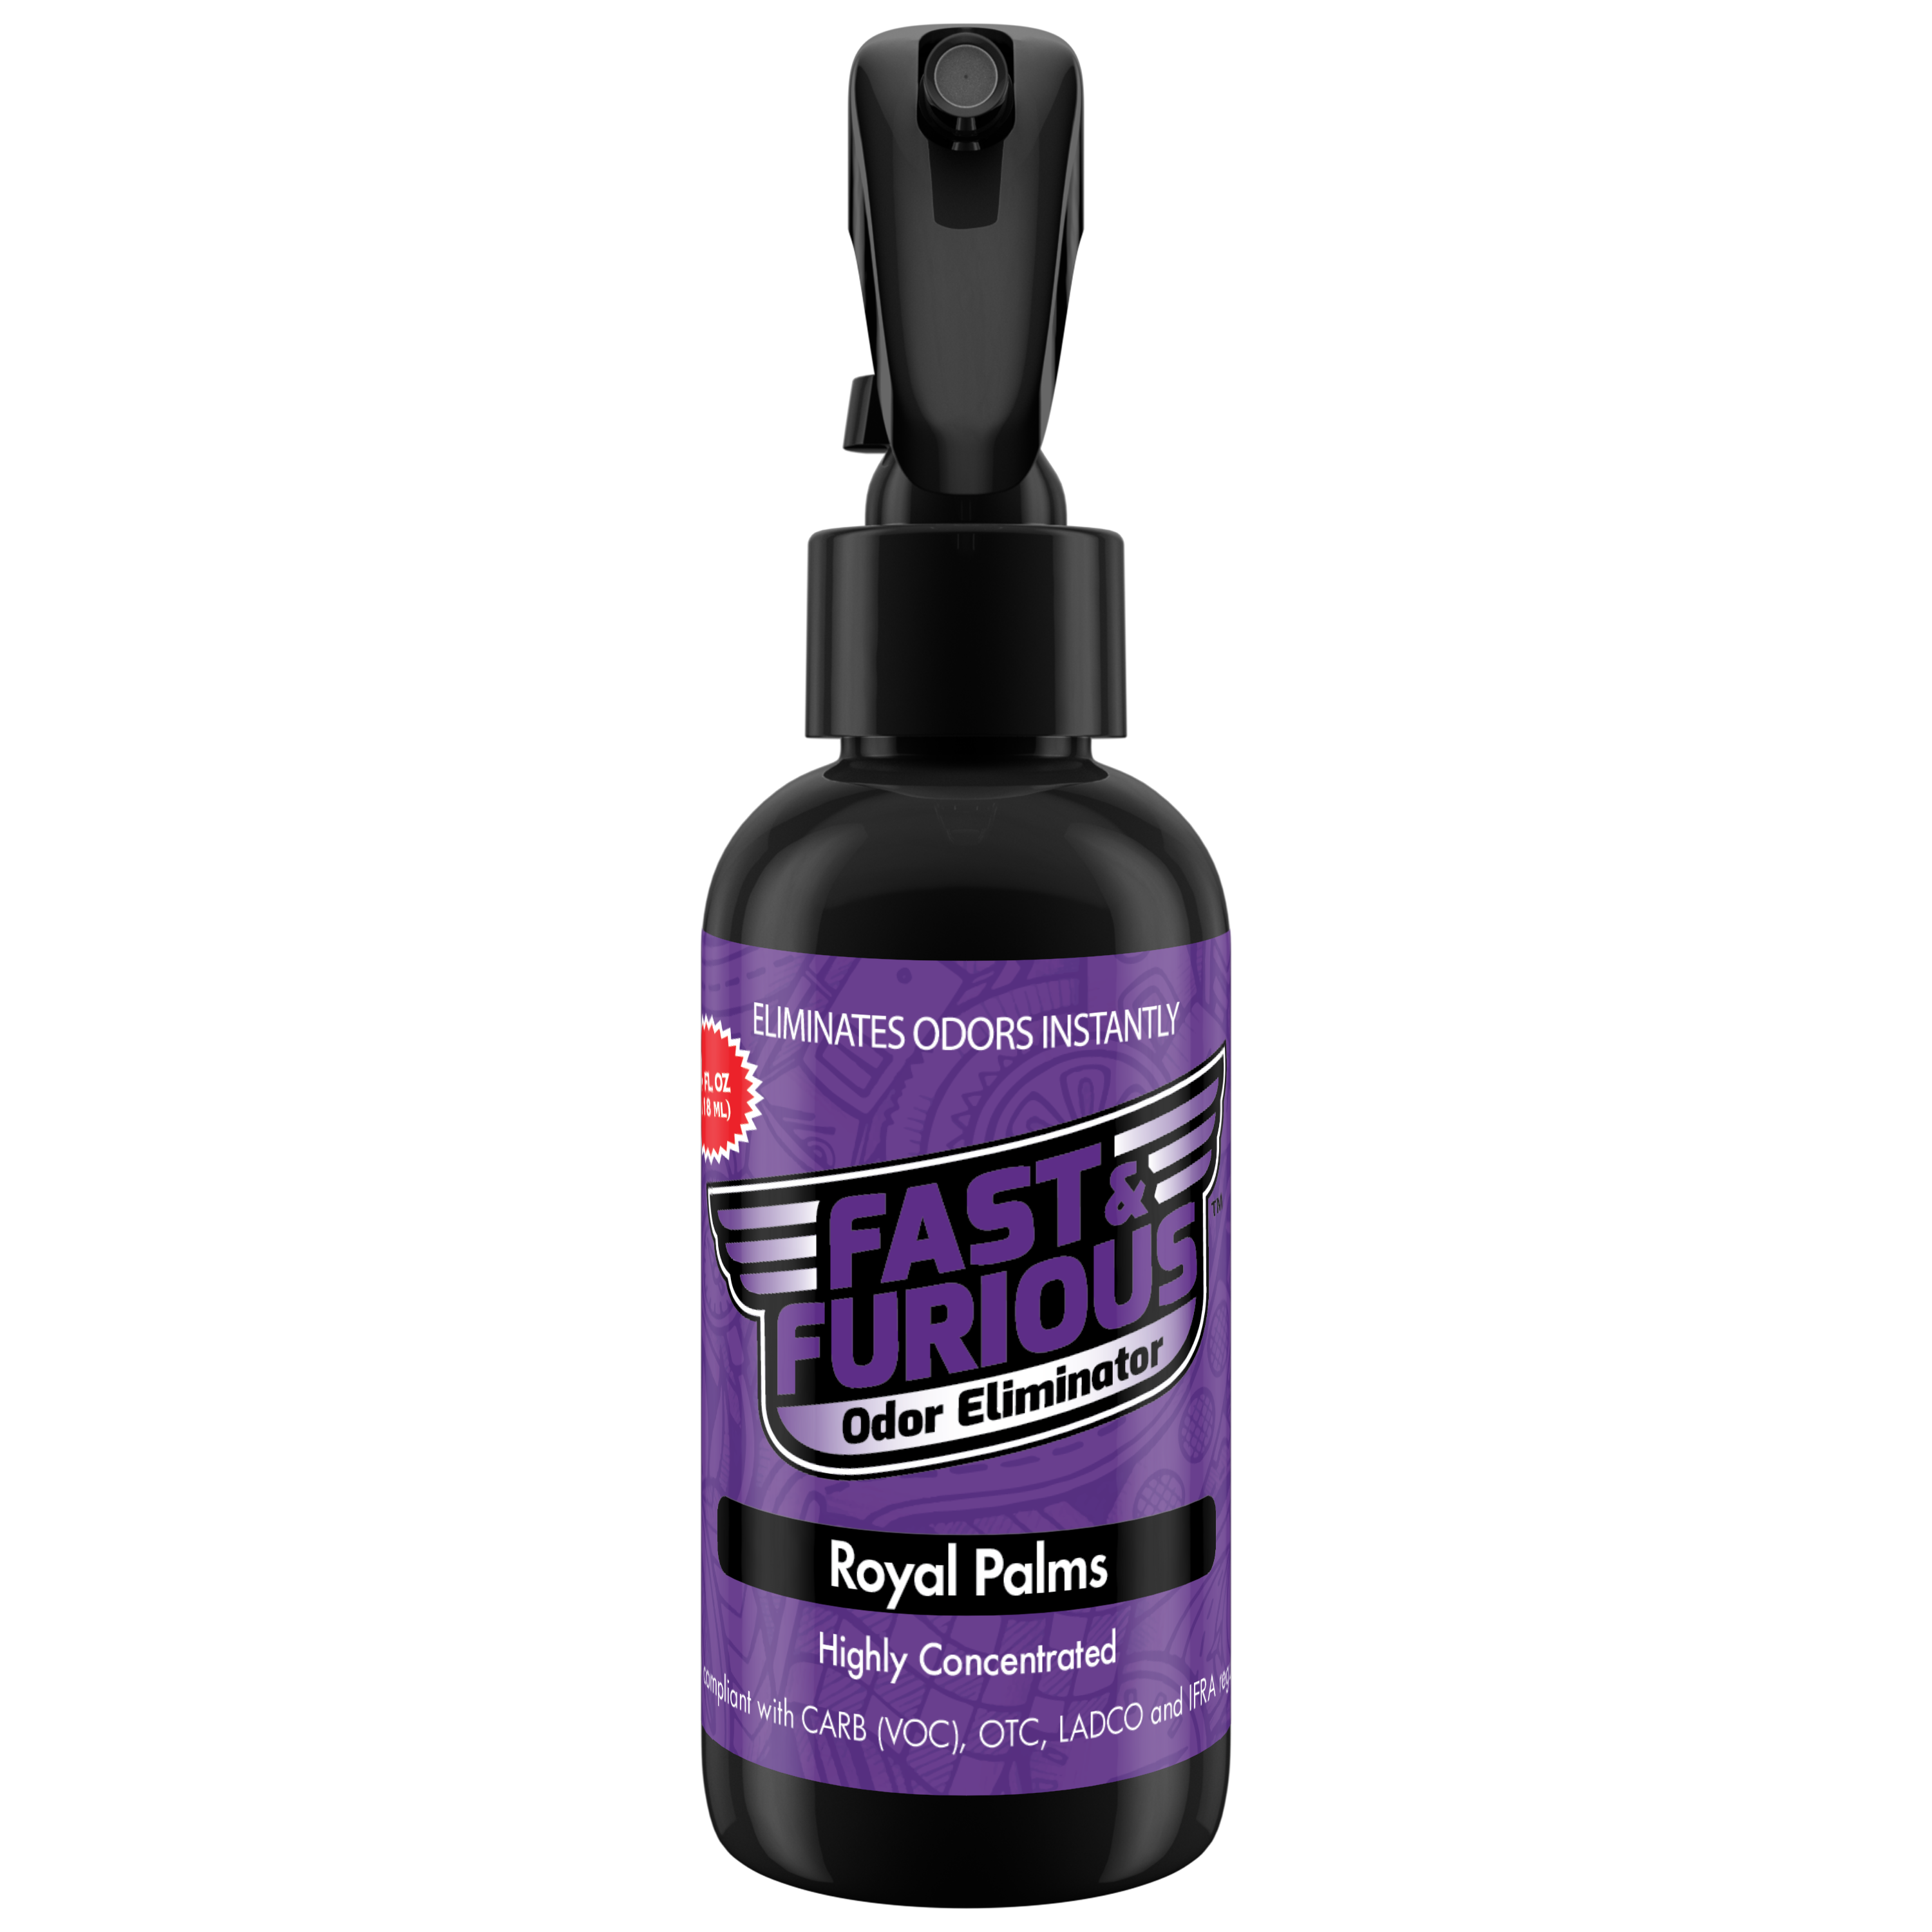 Fast and Furious Odor Eliminator - Royal Palms Scent